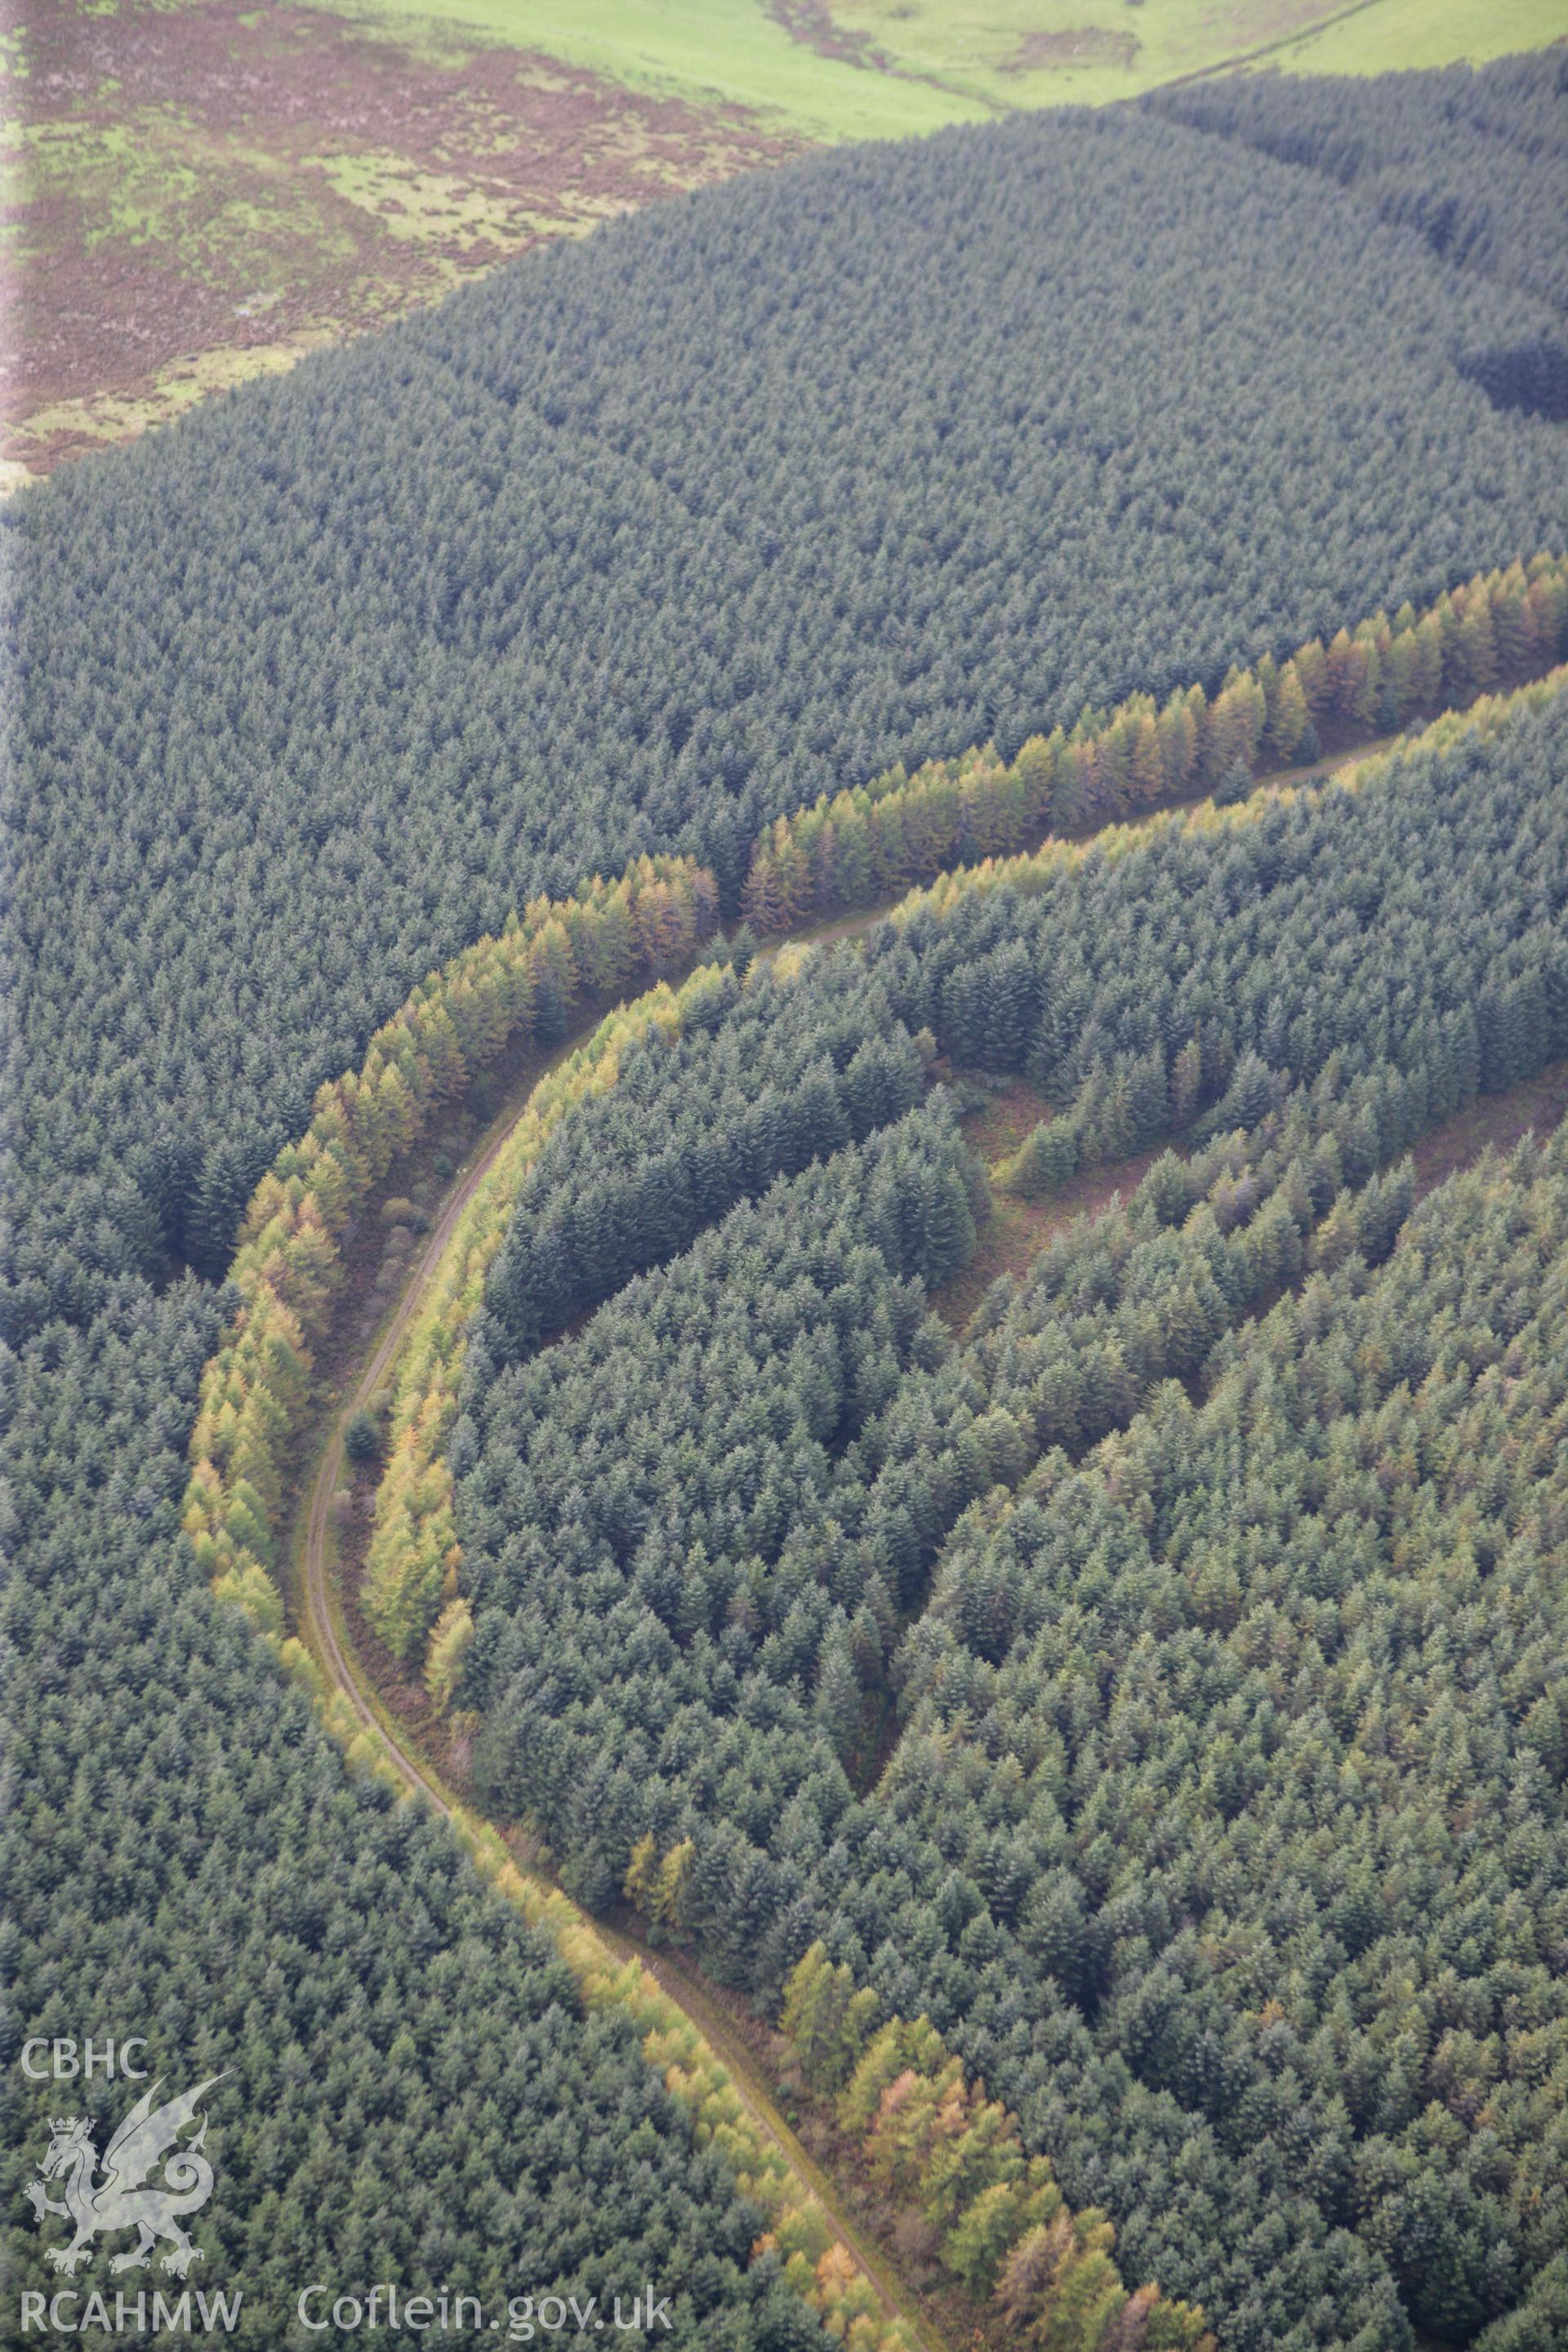 RCAHMW colour oblique aerial photograph of Hafoty Sion Llwyd Cairn (Brenig 46) and the forested landscape. Taken on 13 October 2009 by Toby Driver